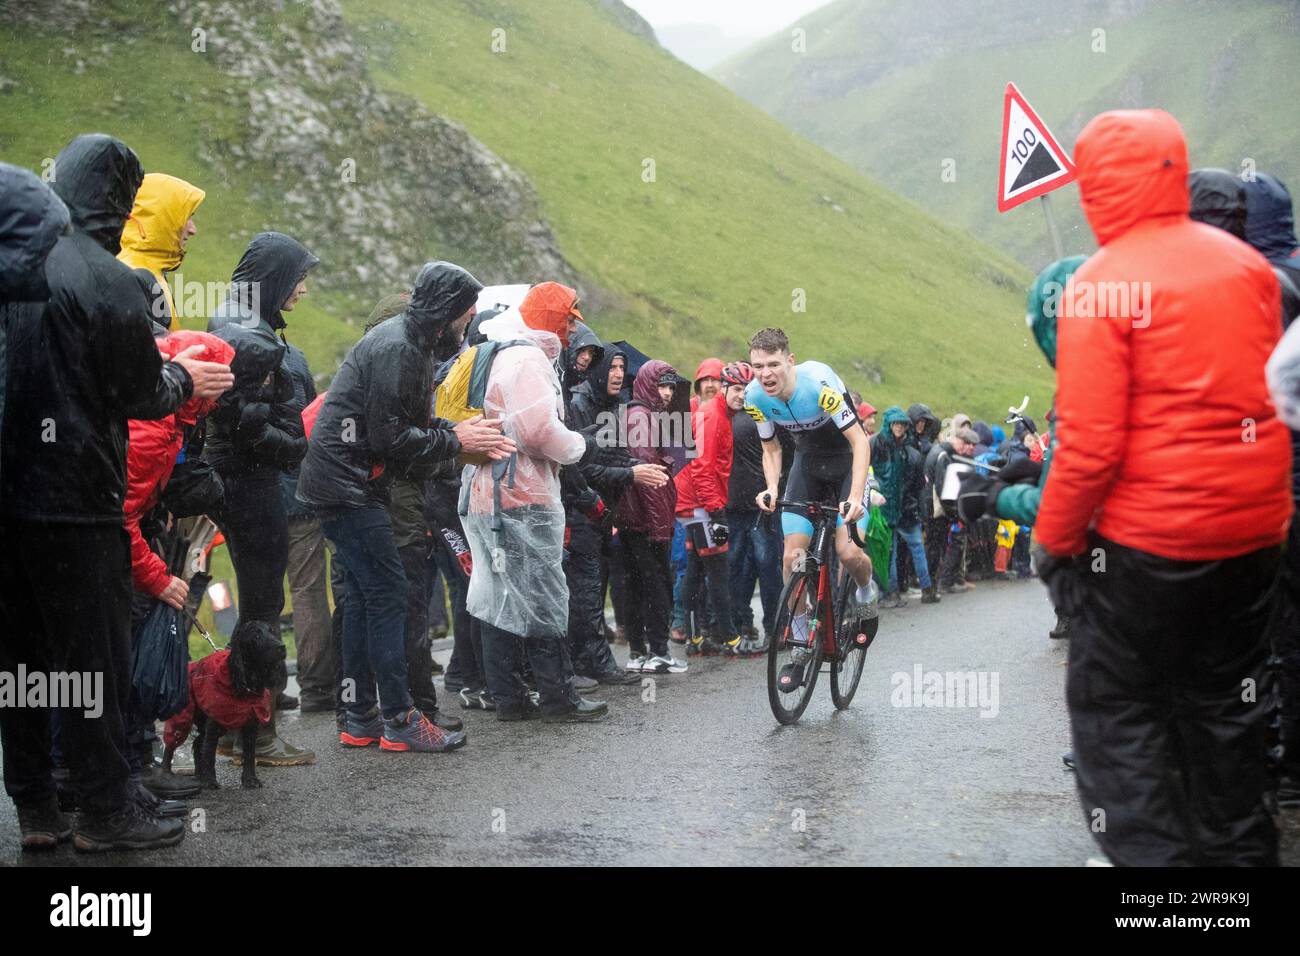 31/10/21   Strining their bodies, faces and bicycles, competitors brave torrential rain as they struggle up Winnats Pass in the Derbyshire Peak Distri Stock Photo